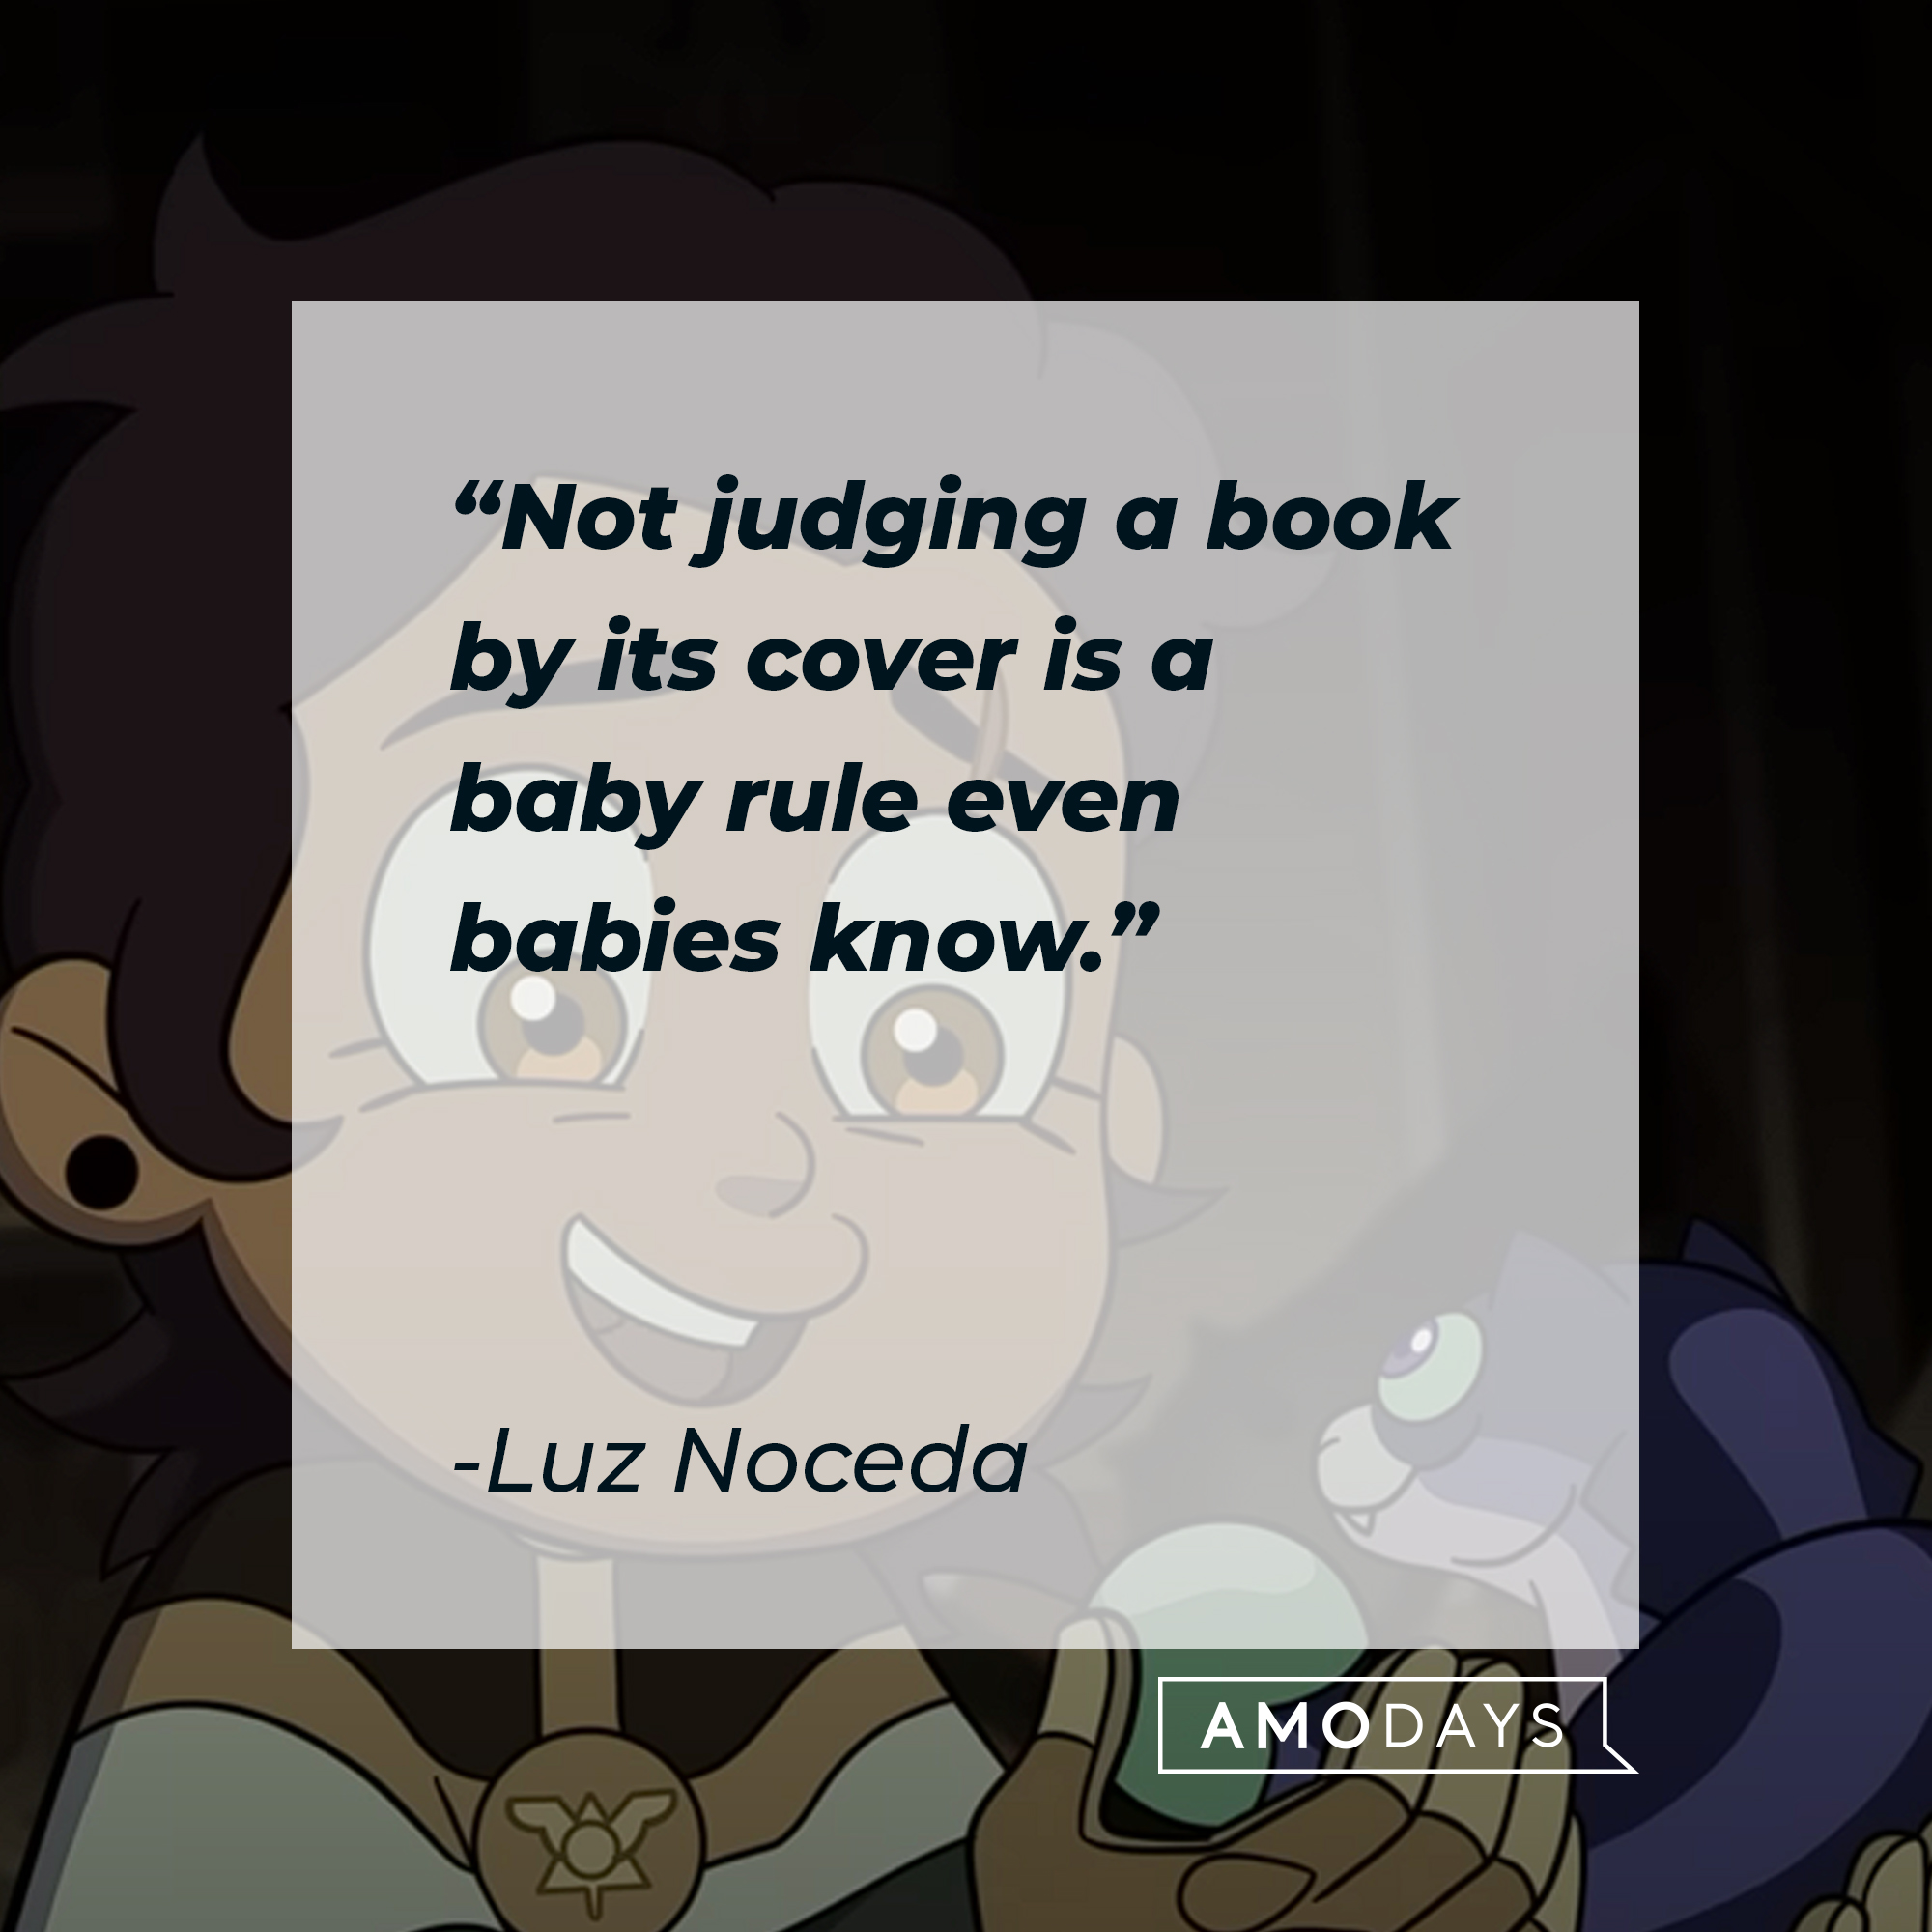 Luz Noceda's quote: “Not judging a book by its cover is a baby rule even babies know.” | Source: youtube.com/disneychannel